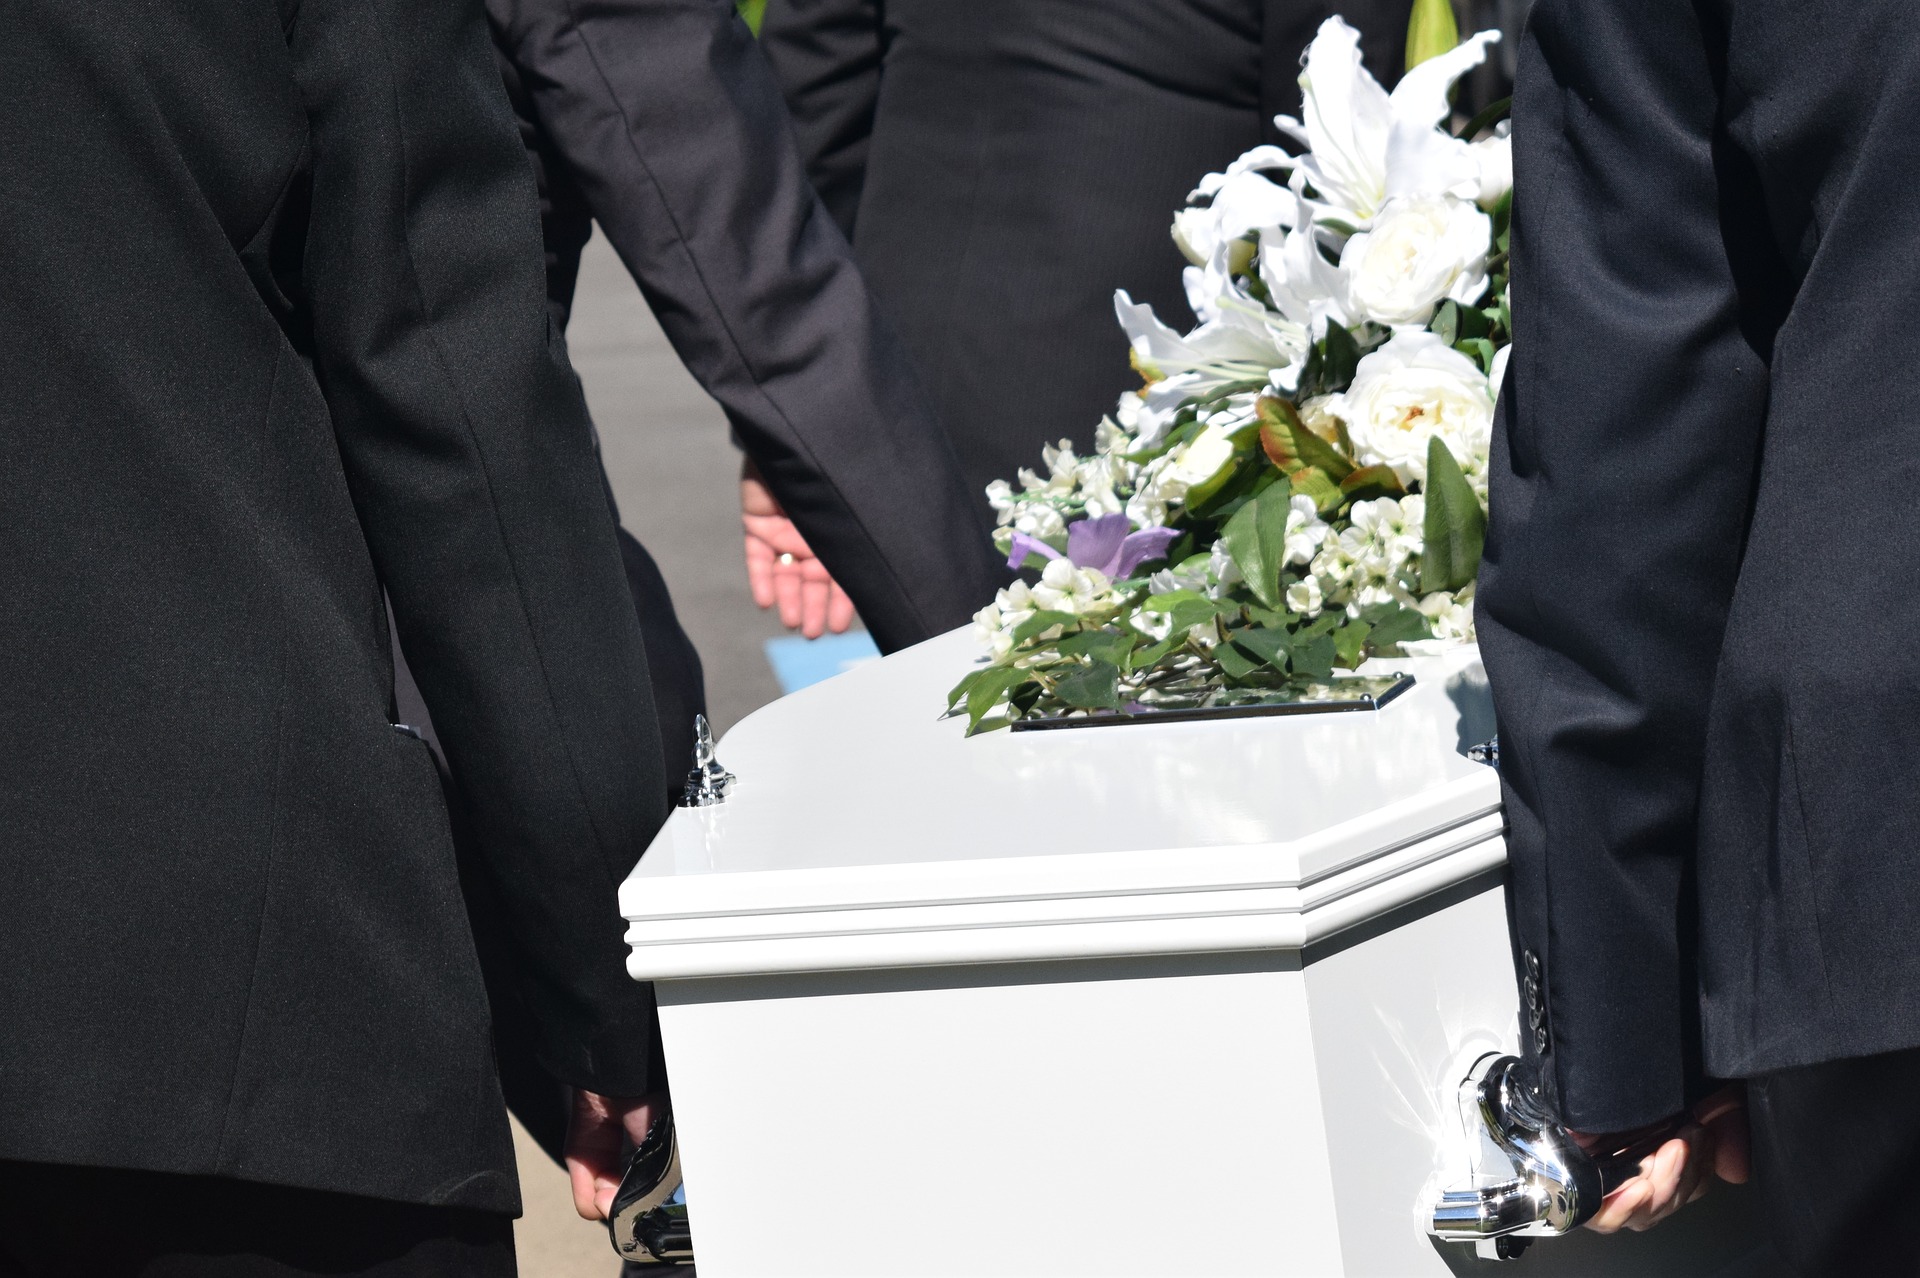 5 rookie mistakes to avoid when looking to buy caskets for sale